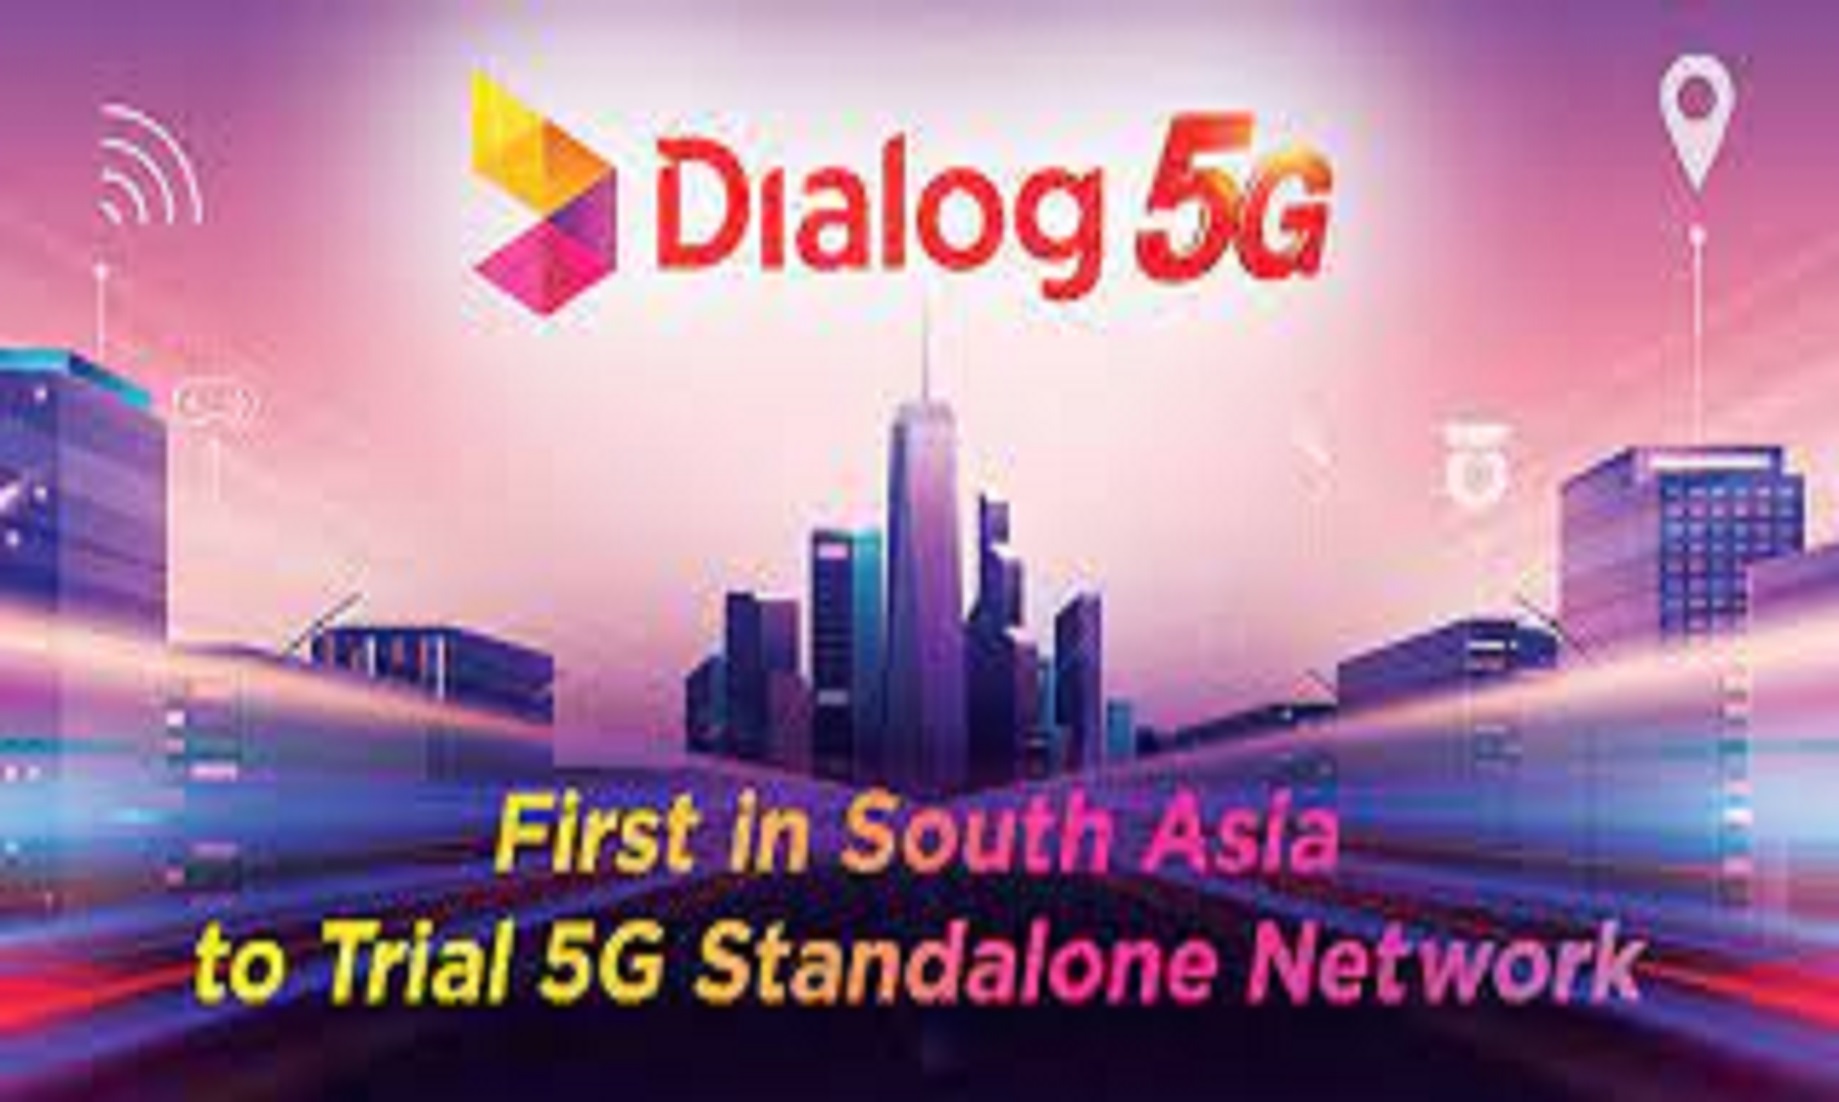 Sri Lanka Becomes First In South Asia To Trial 5G Technology